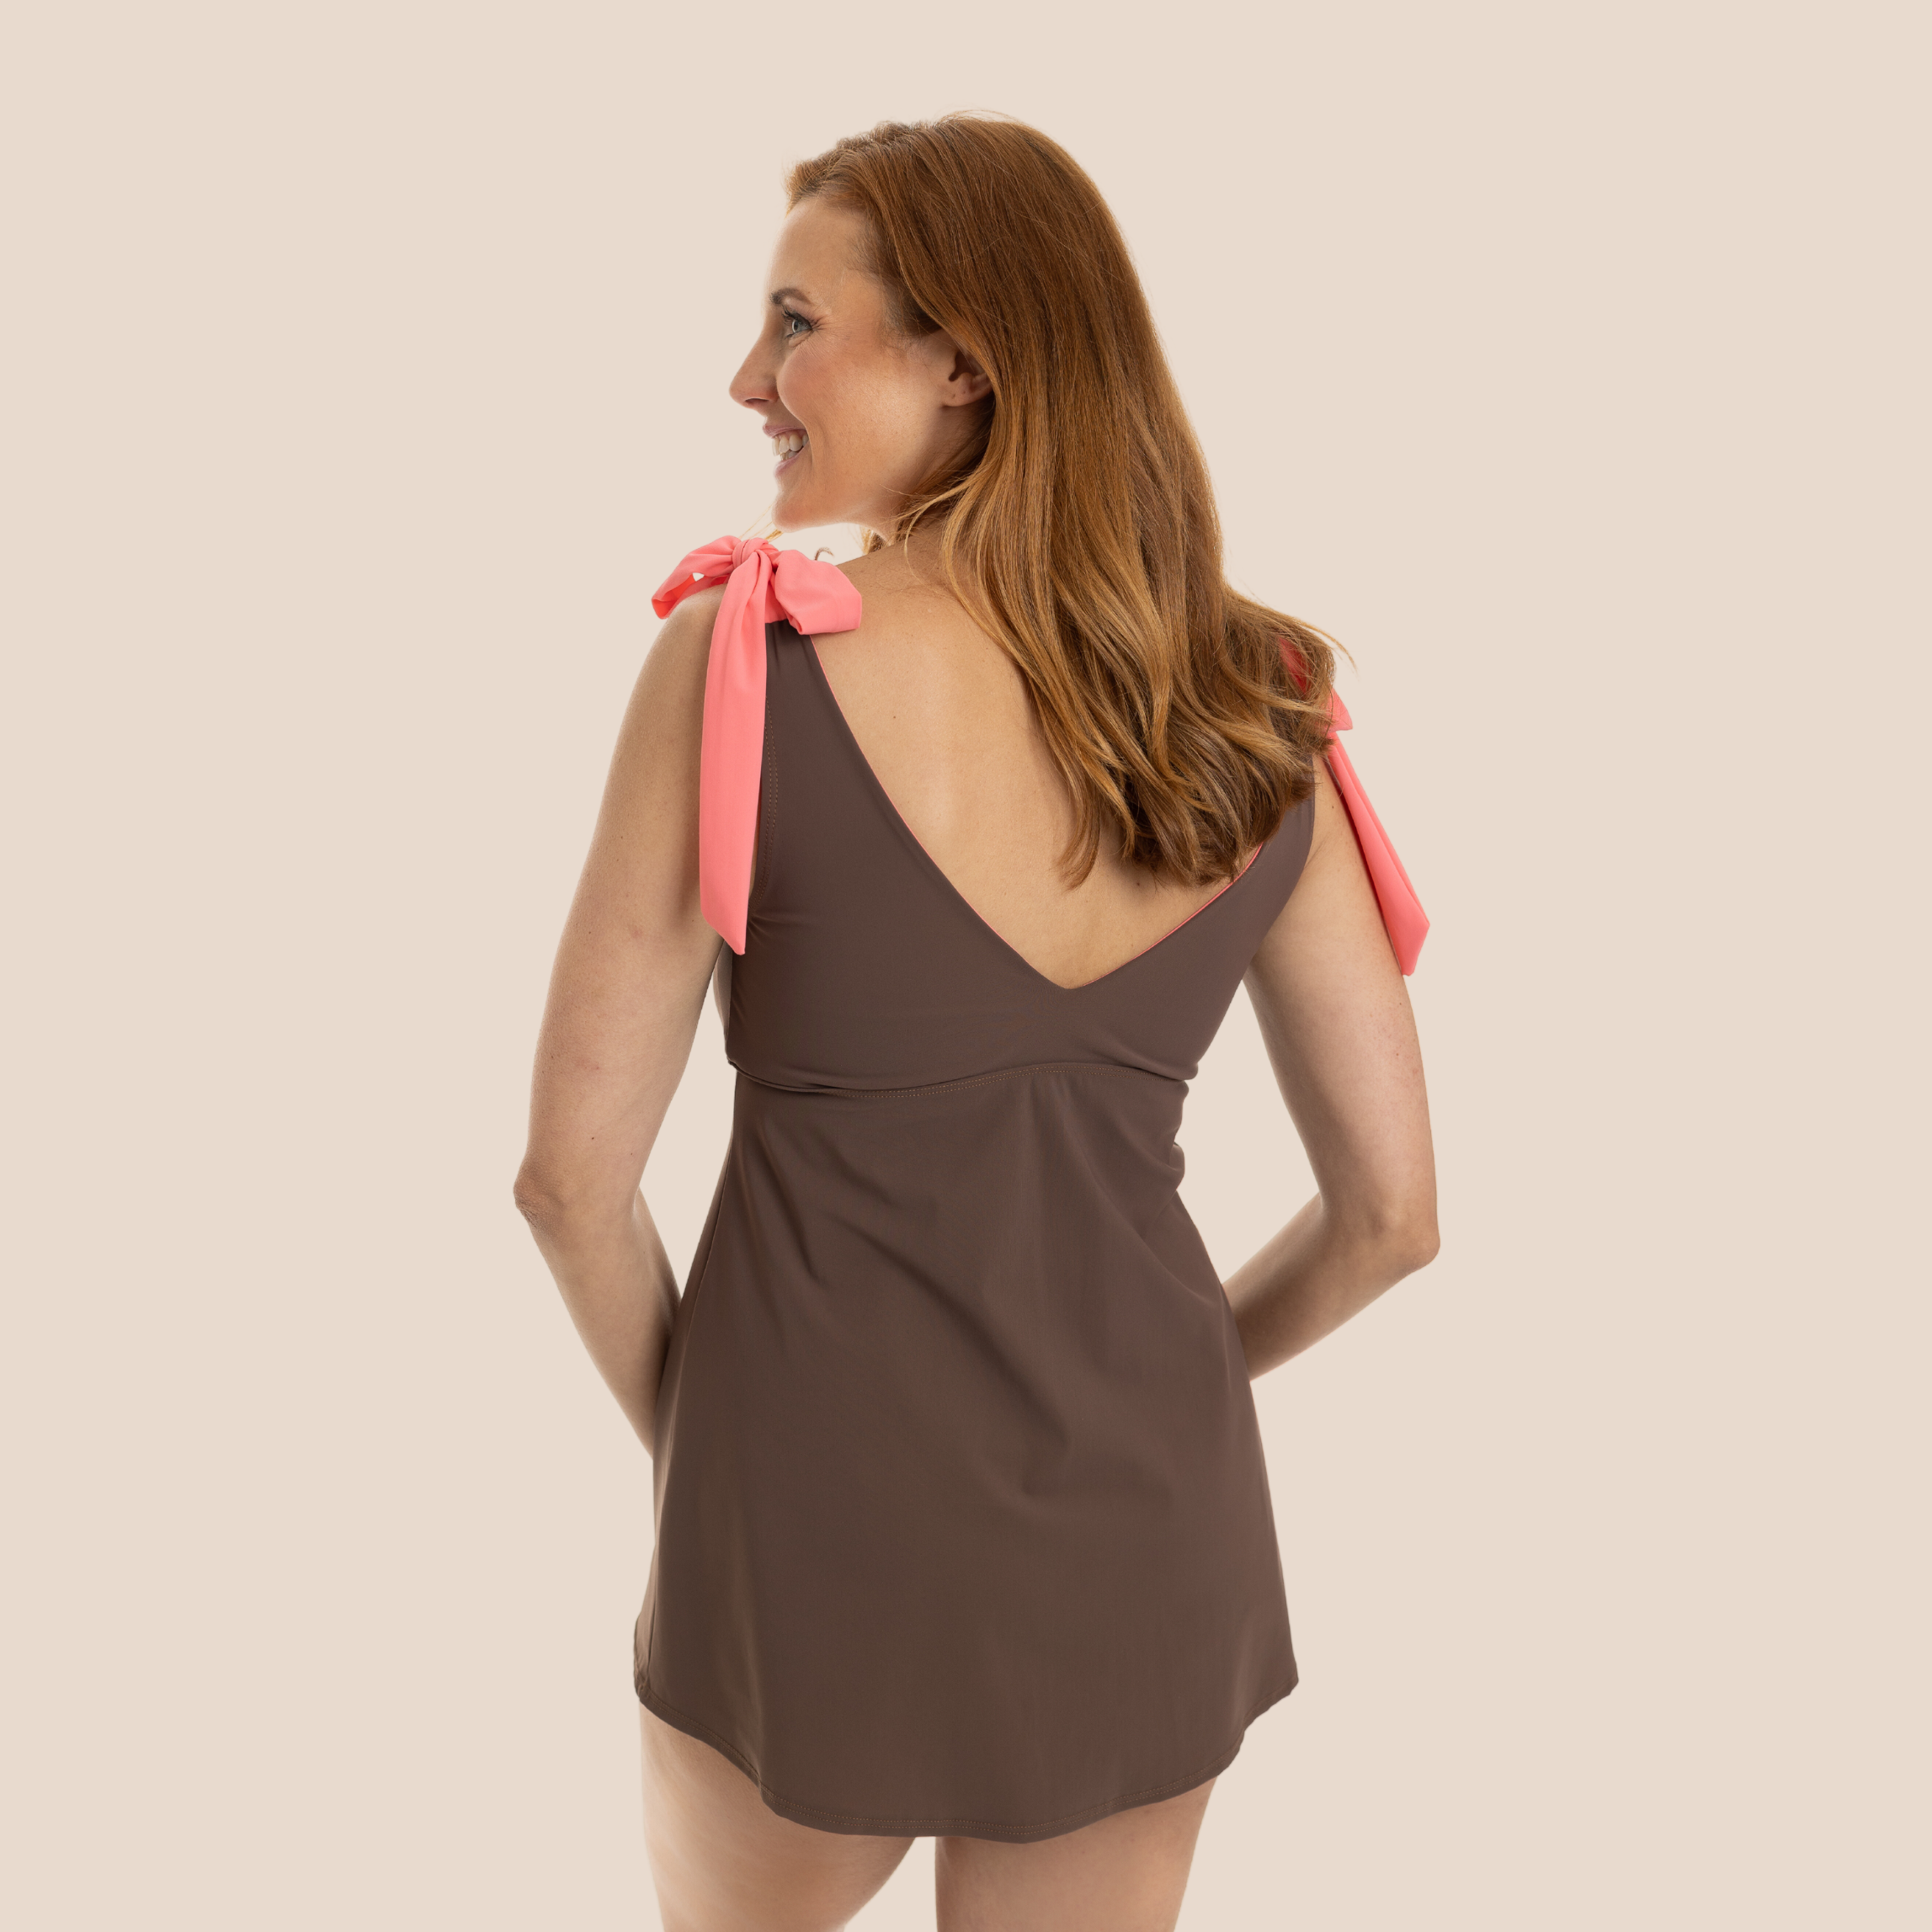 Flirty Tie Shoulder Tankini Top - Driftwood Brown/Coral